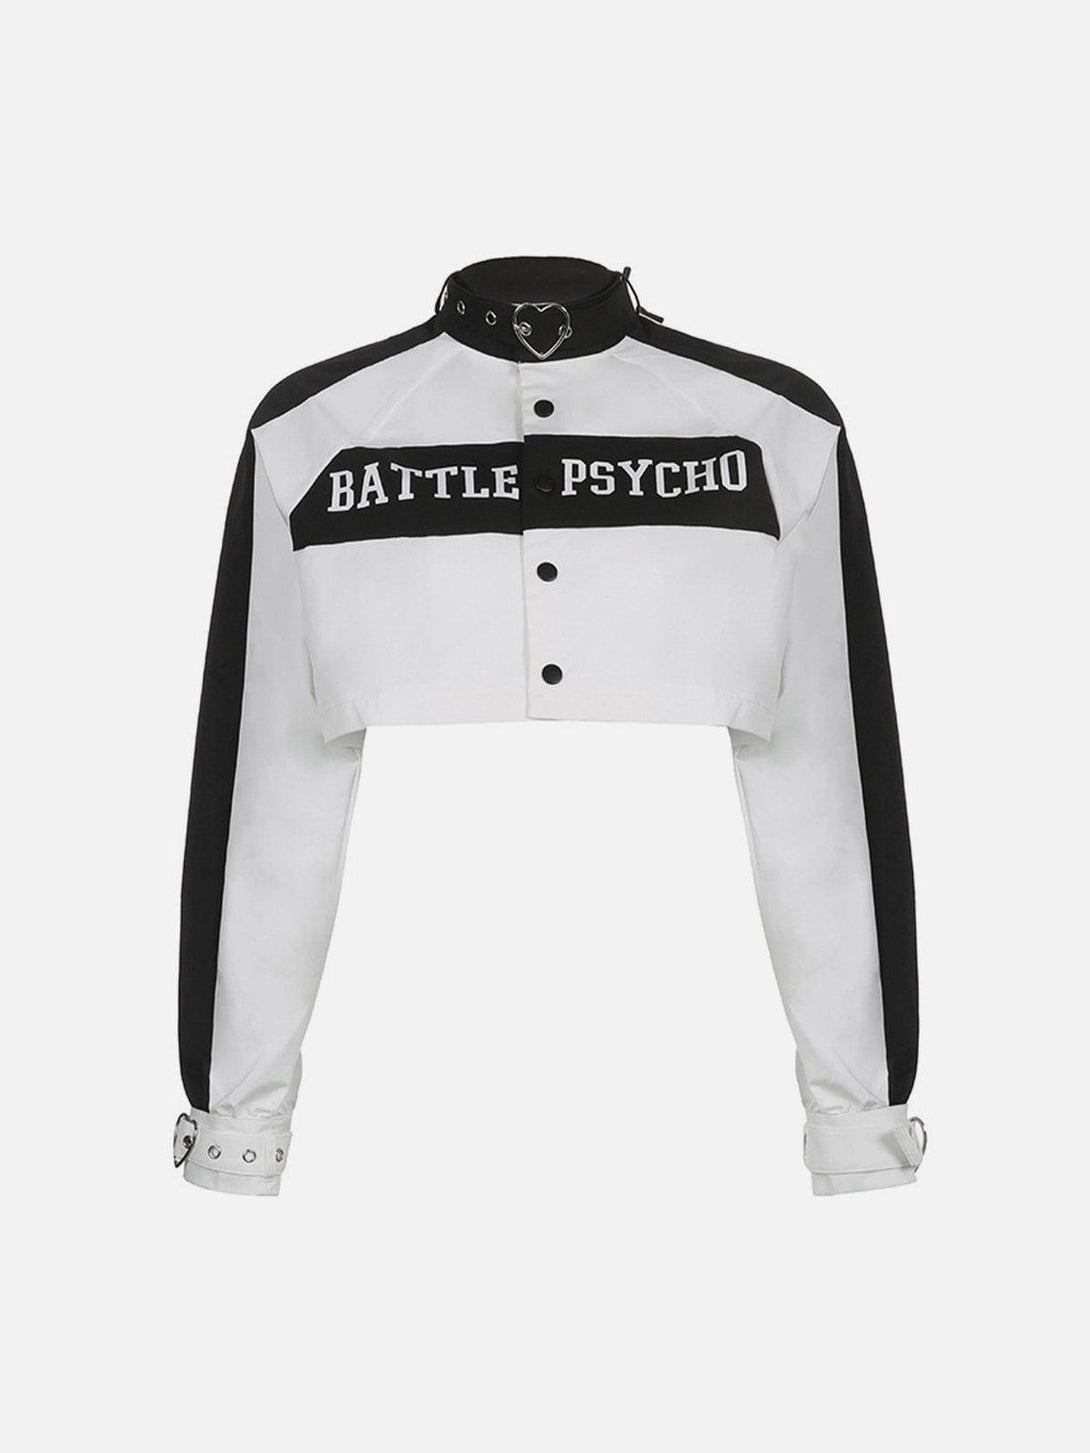 Levefly - Lettering Print Patchwork Jackets - Streetwear Fashion - levefly.com